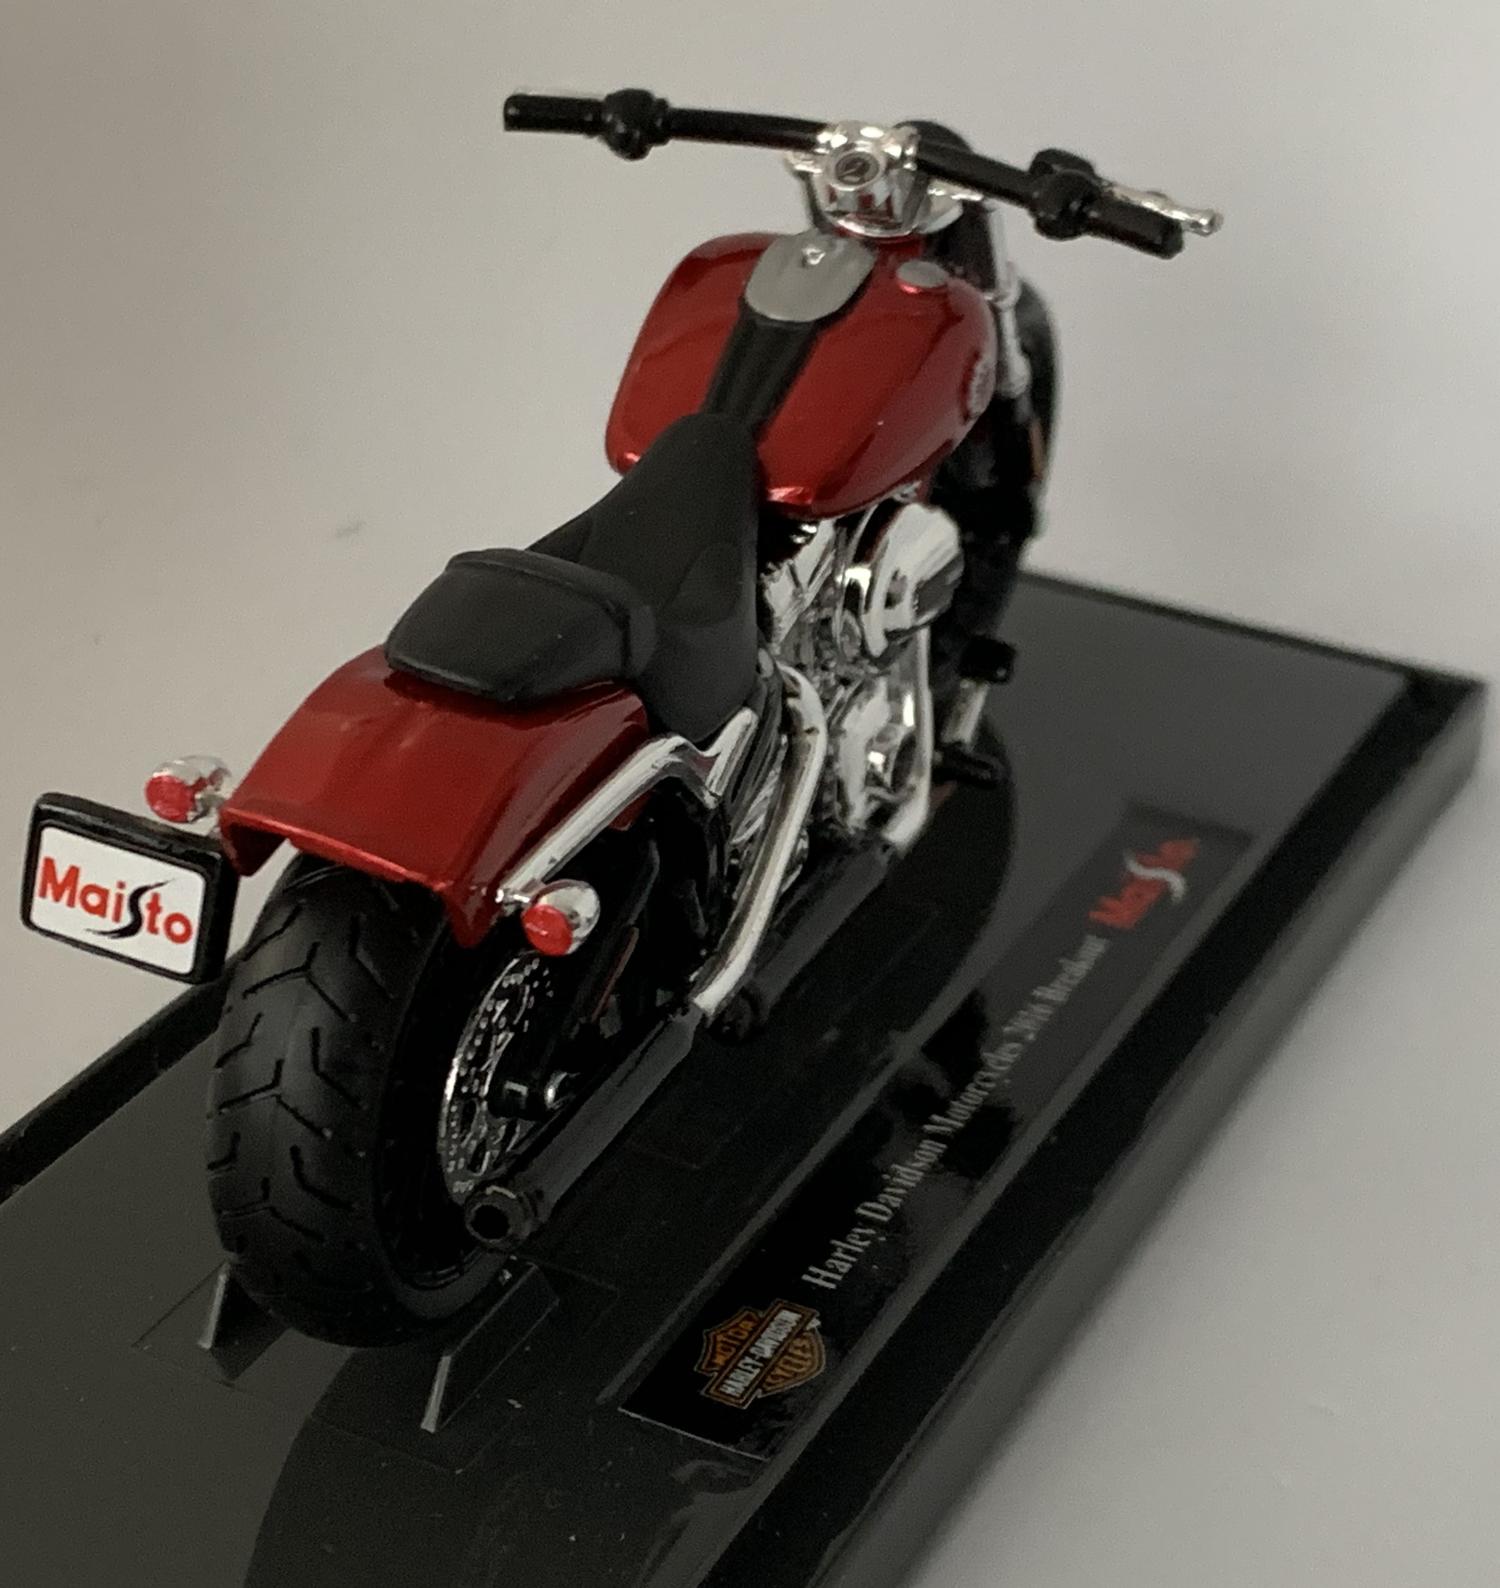 Harley Davidson 2016 Breakout in red 1:18 scale model from Maisto